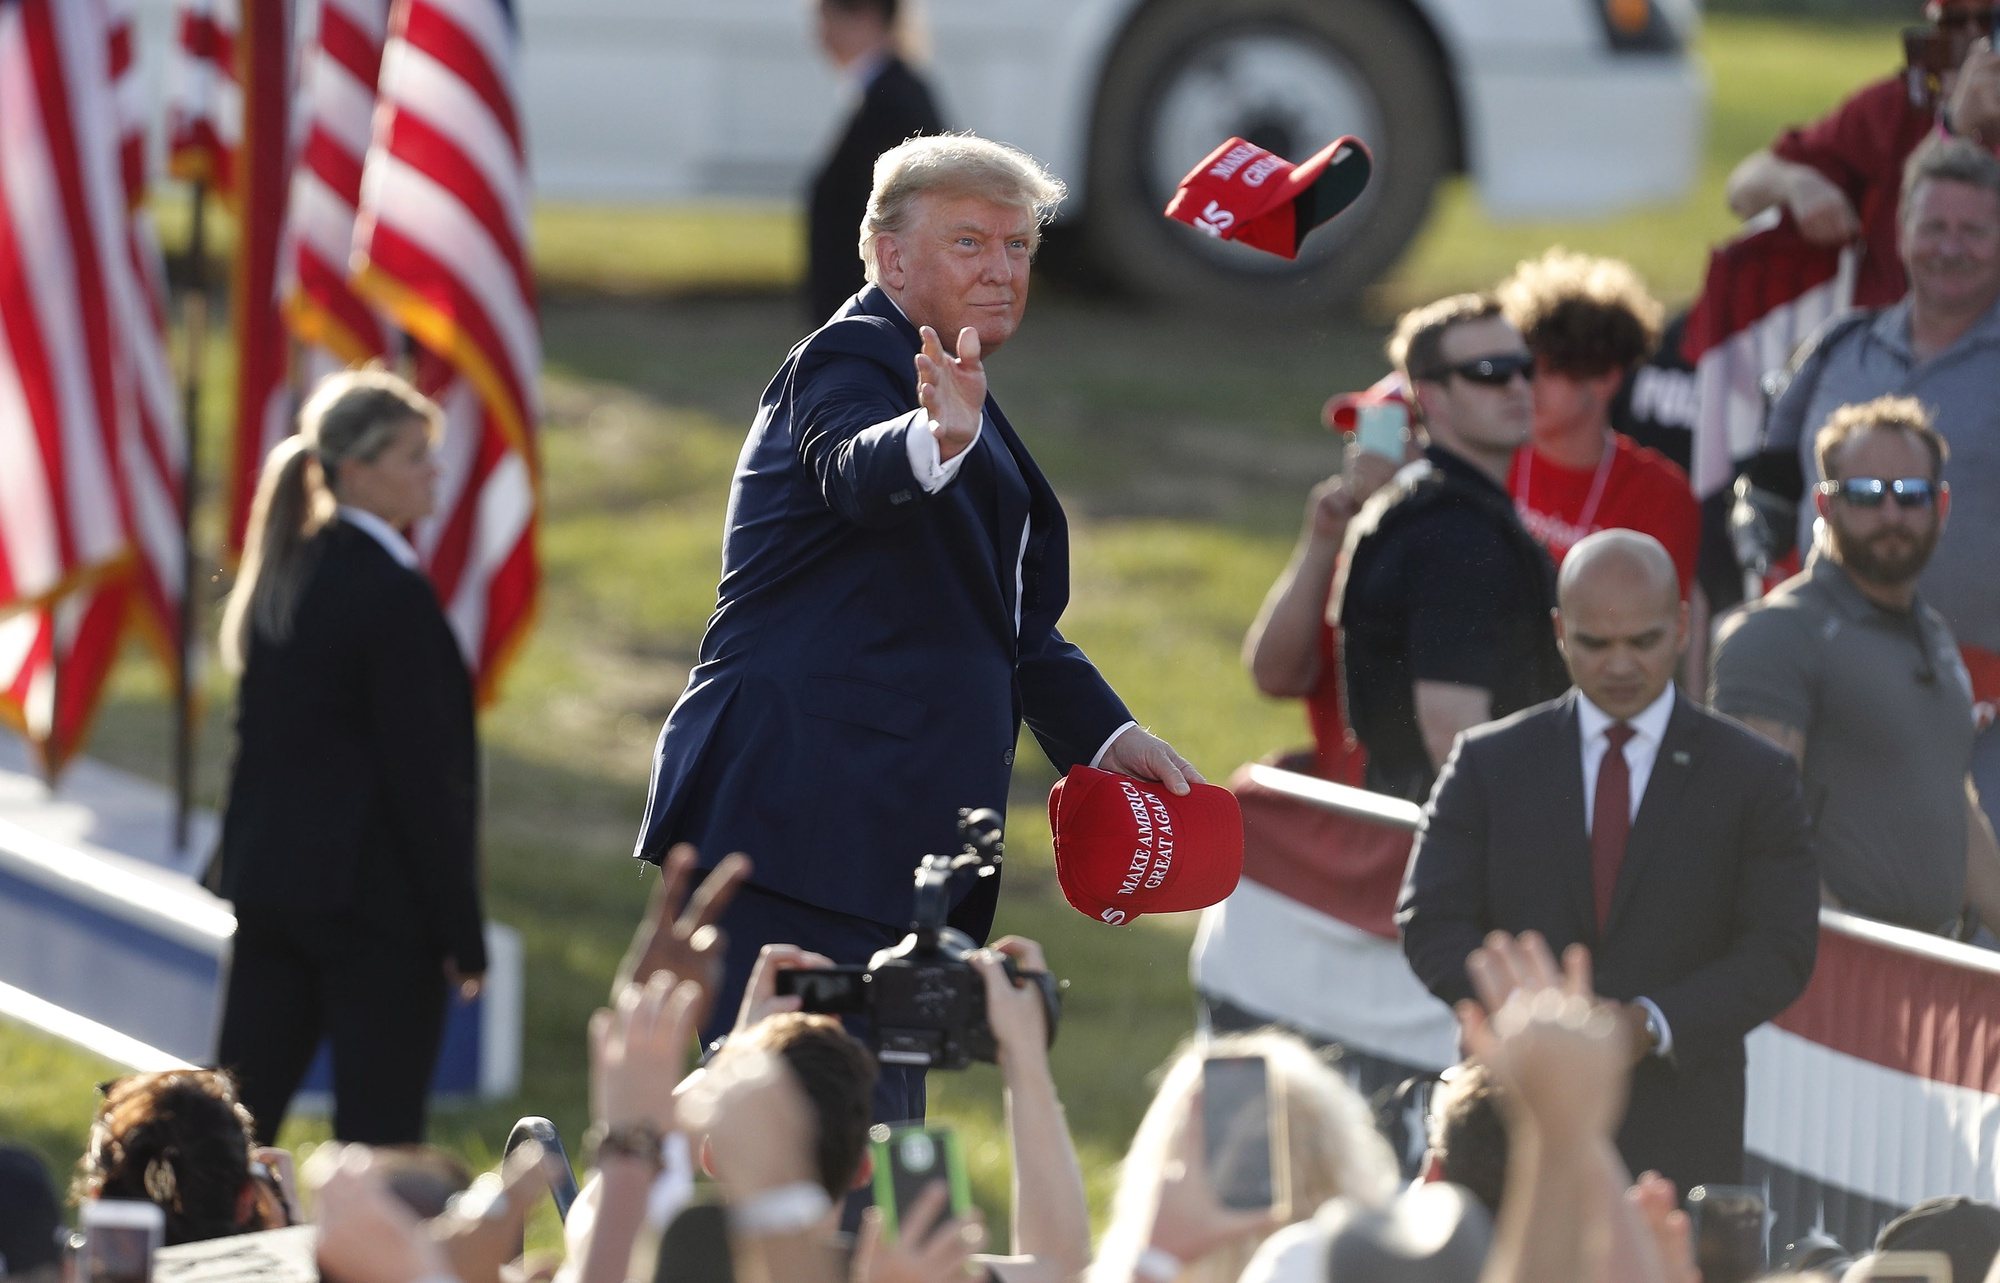 epa09905591 Former US President Donald Trump tosses MAGA hats to the crowd as he arrives for a Save America rally at the Delaware County Fairgrounds in Delaware, Ohio, USA, 23 April 2022.  EPA/DAVID MAXWELL